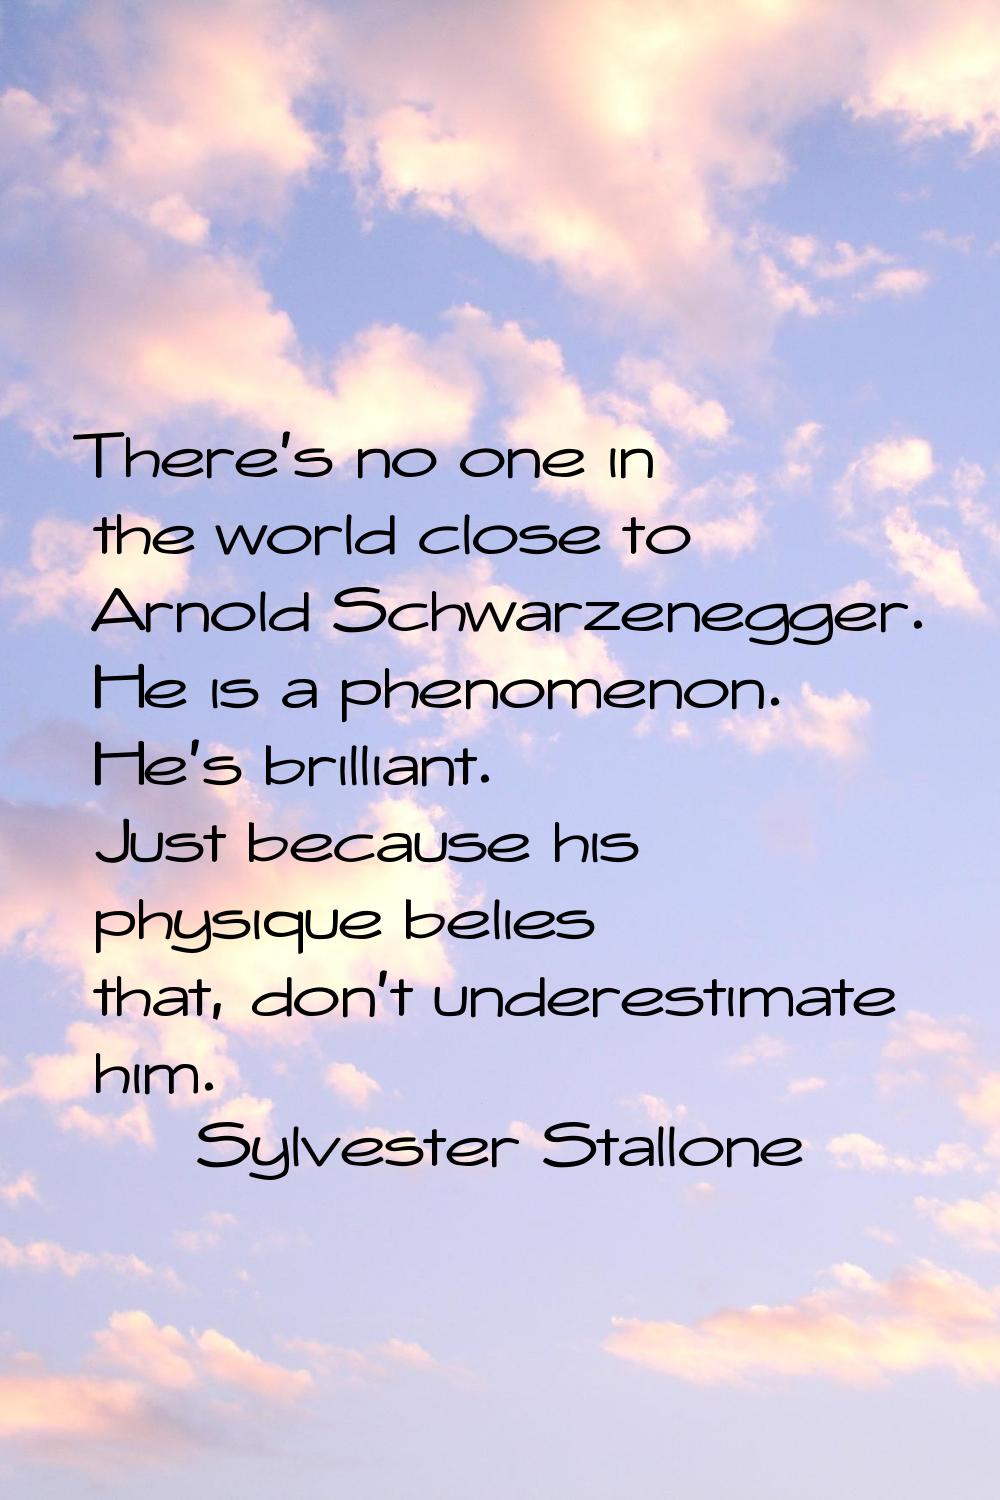 There's no one in the world close to Arnold Schwarzenegger. He is a phenomenon. He's brilliant. Jus